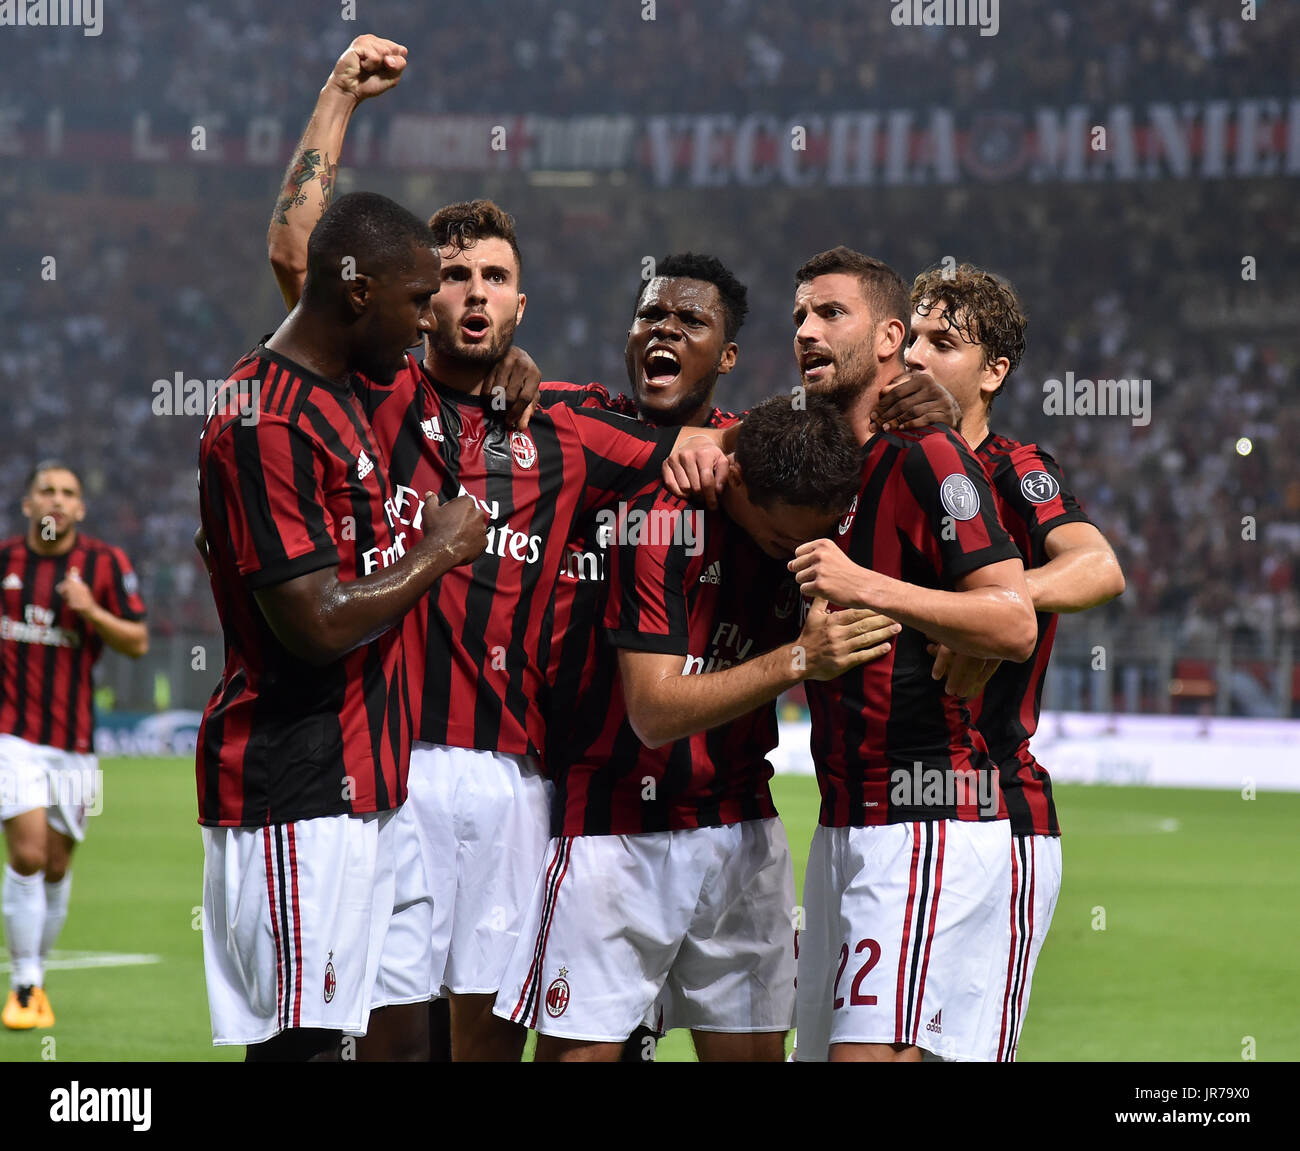 Milan, Italy. 3rd Aug, 2017. Players of AC Milan celebrate after scoring  during the Europa League third qualifying round second leg soccer match  against U Craiova at the San Siro Stadium in